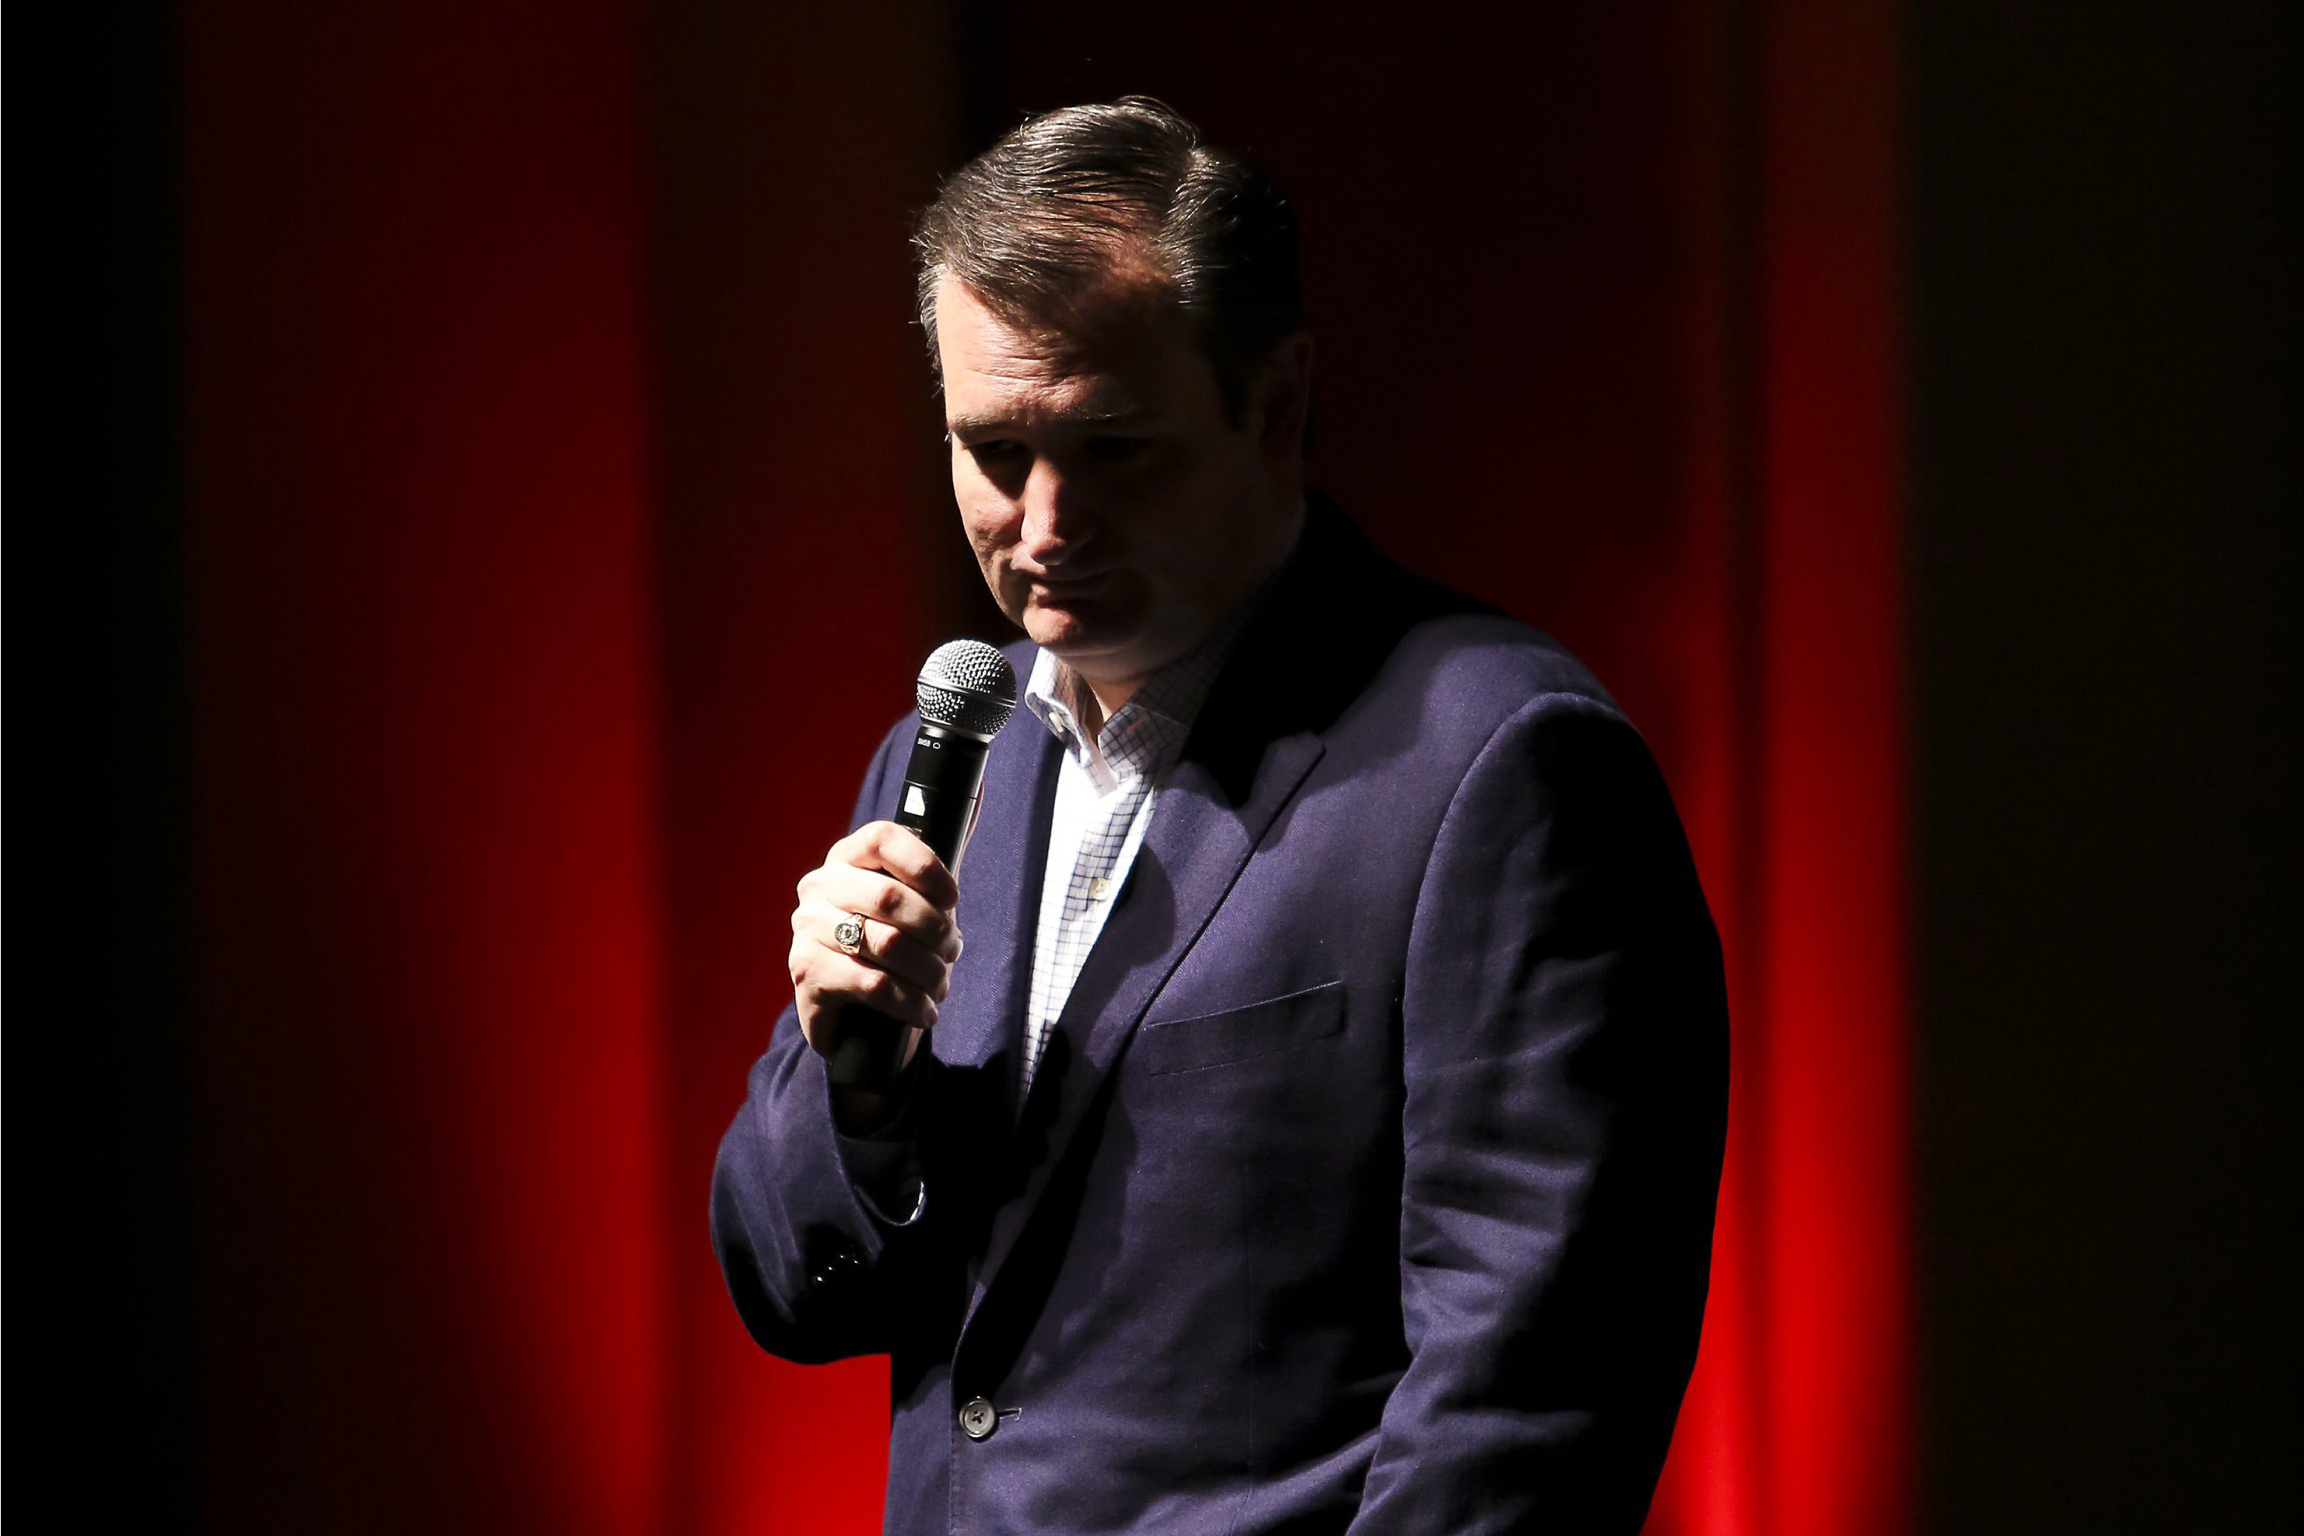 Republican Presidential candidate Sen. Ted Cruz, R-Tx., speaks to the crowd at the Sharon Lynne Wilson Center for the Arts in Brookfield, Wisconsin